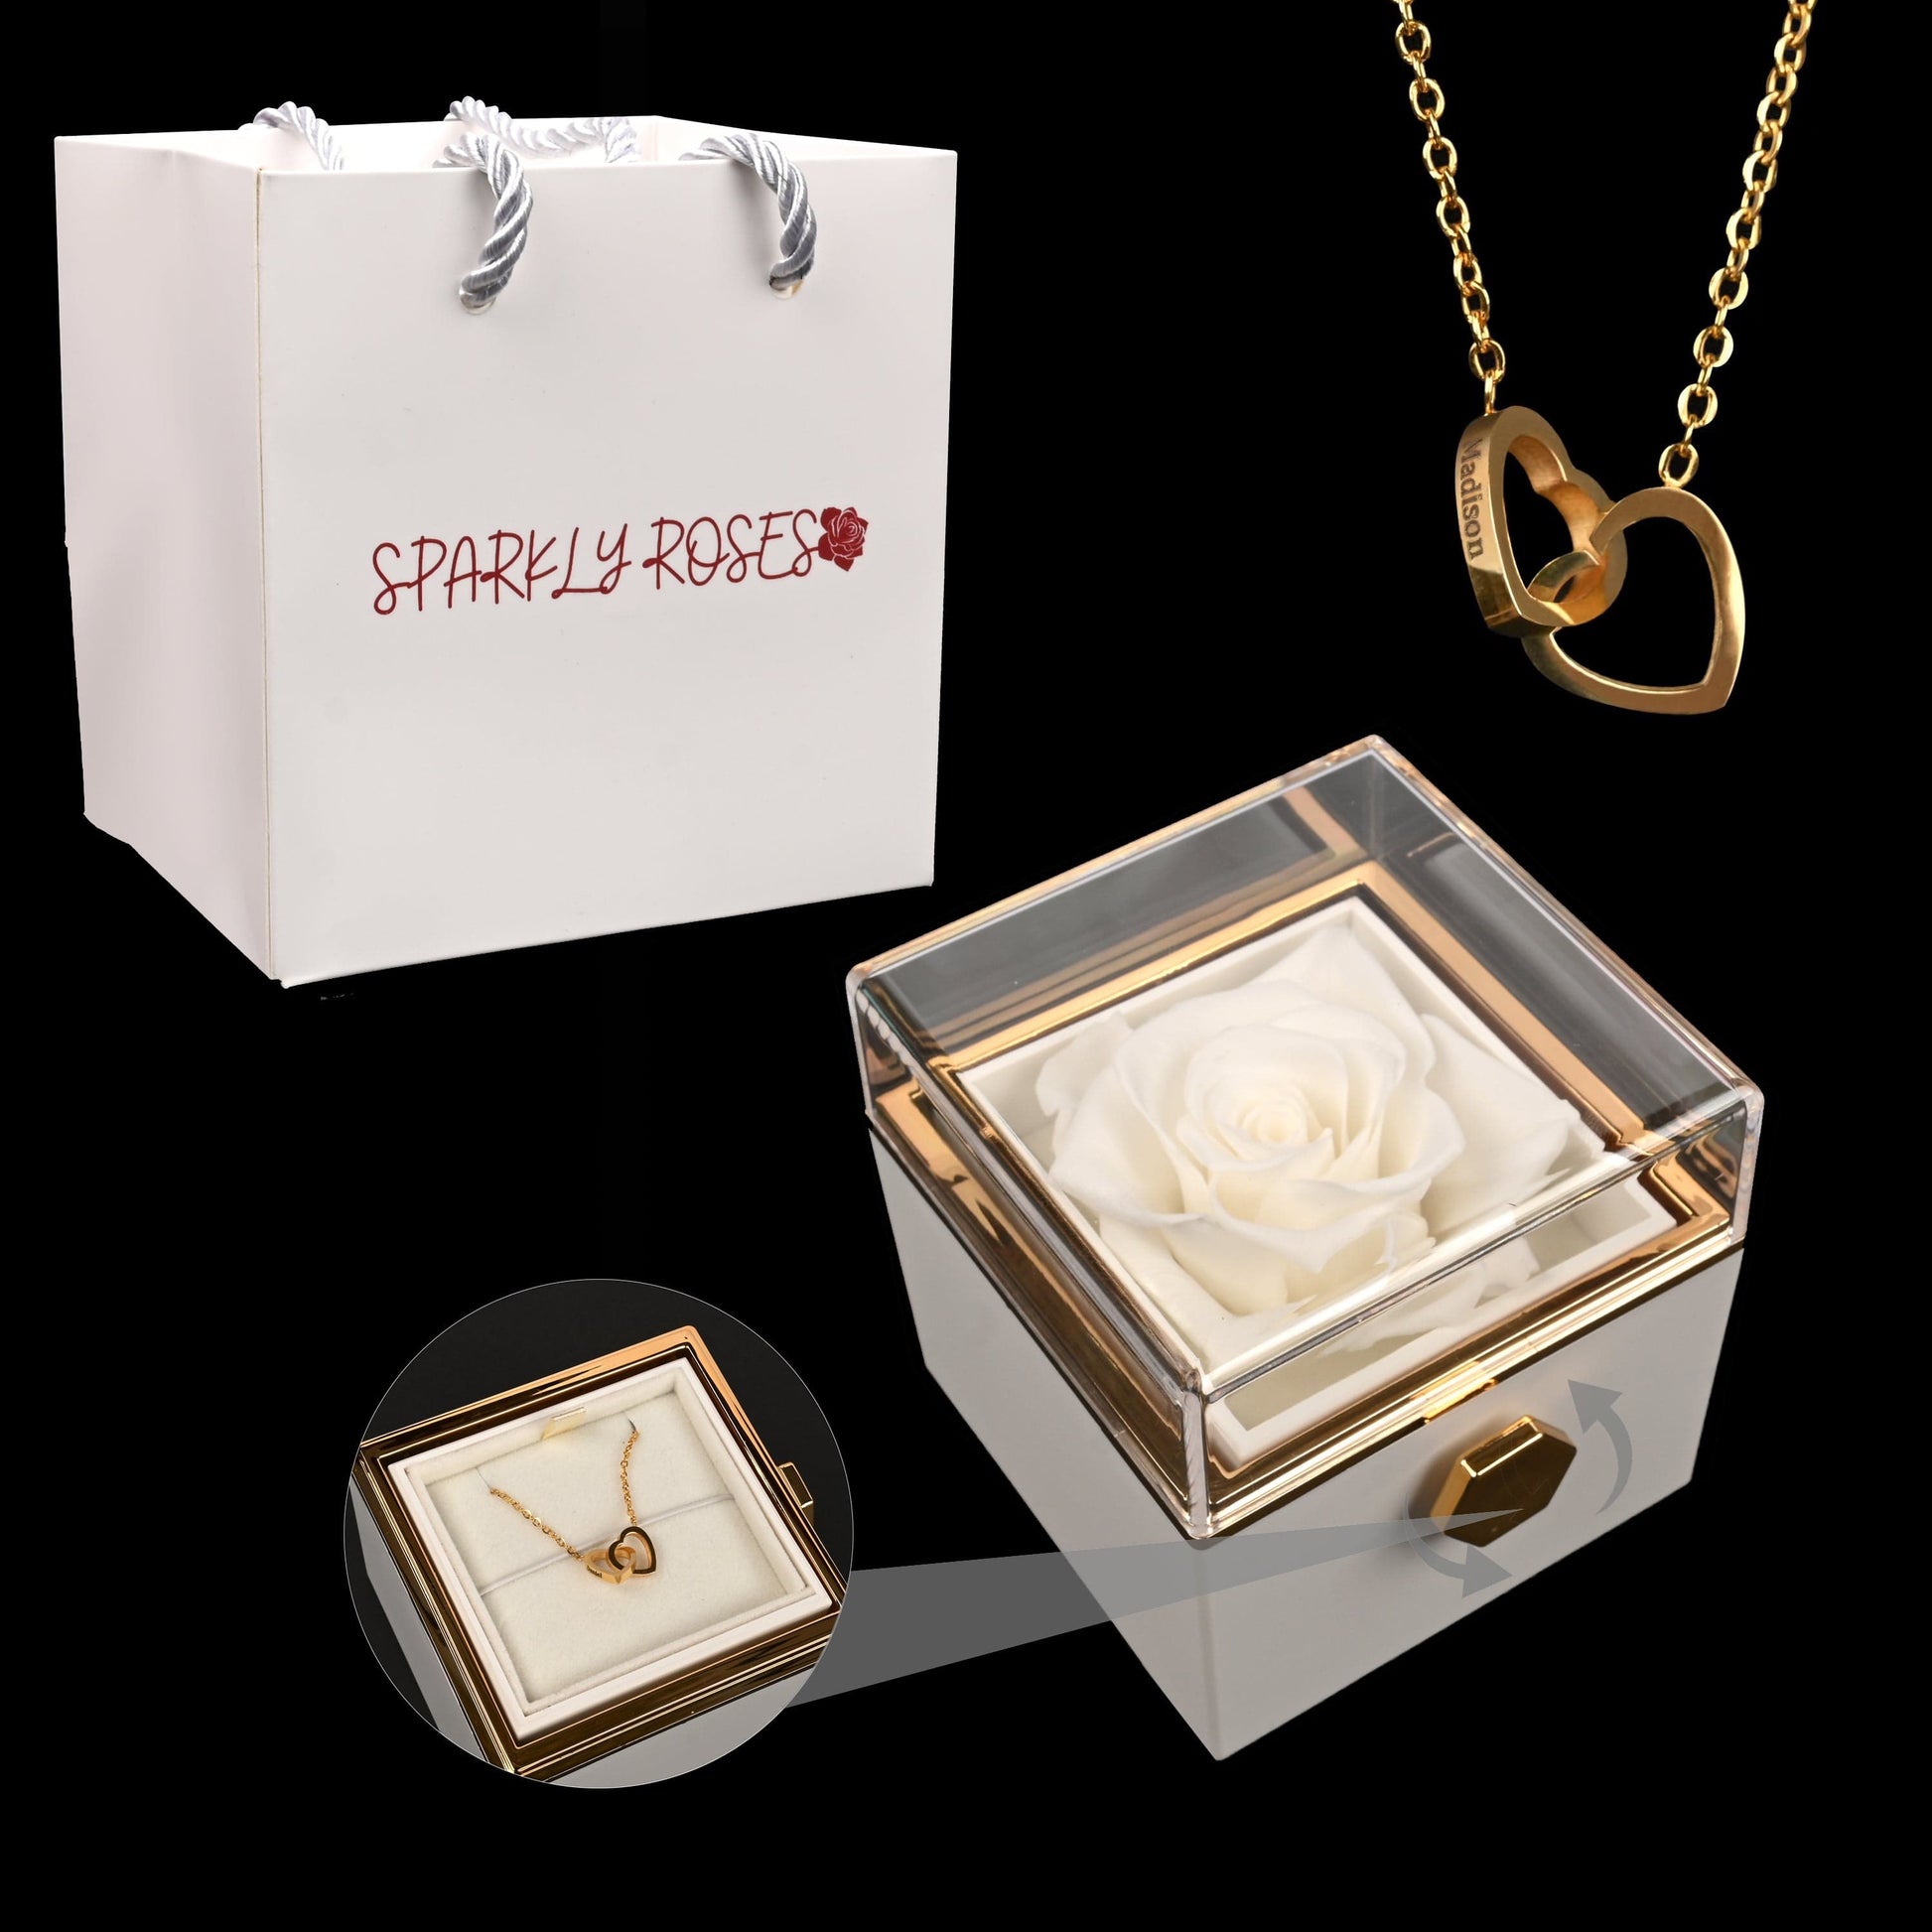 Sparkly Roses Eternal Rose Box - W/ Engraved Necklace & Real Rose White / Gold